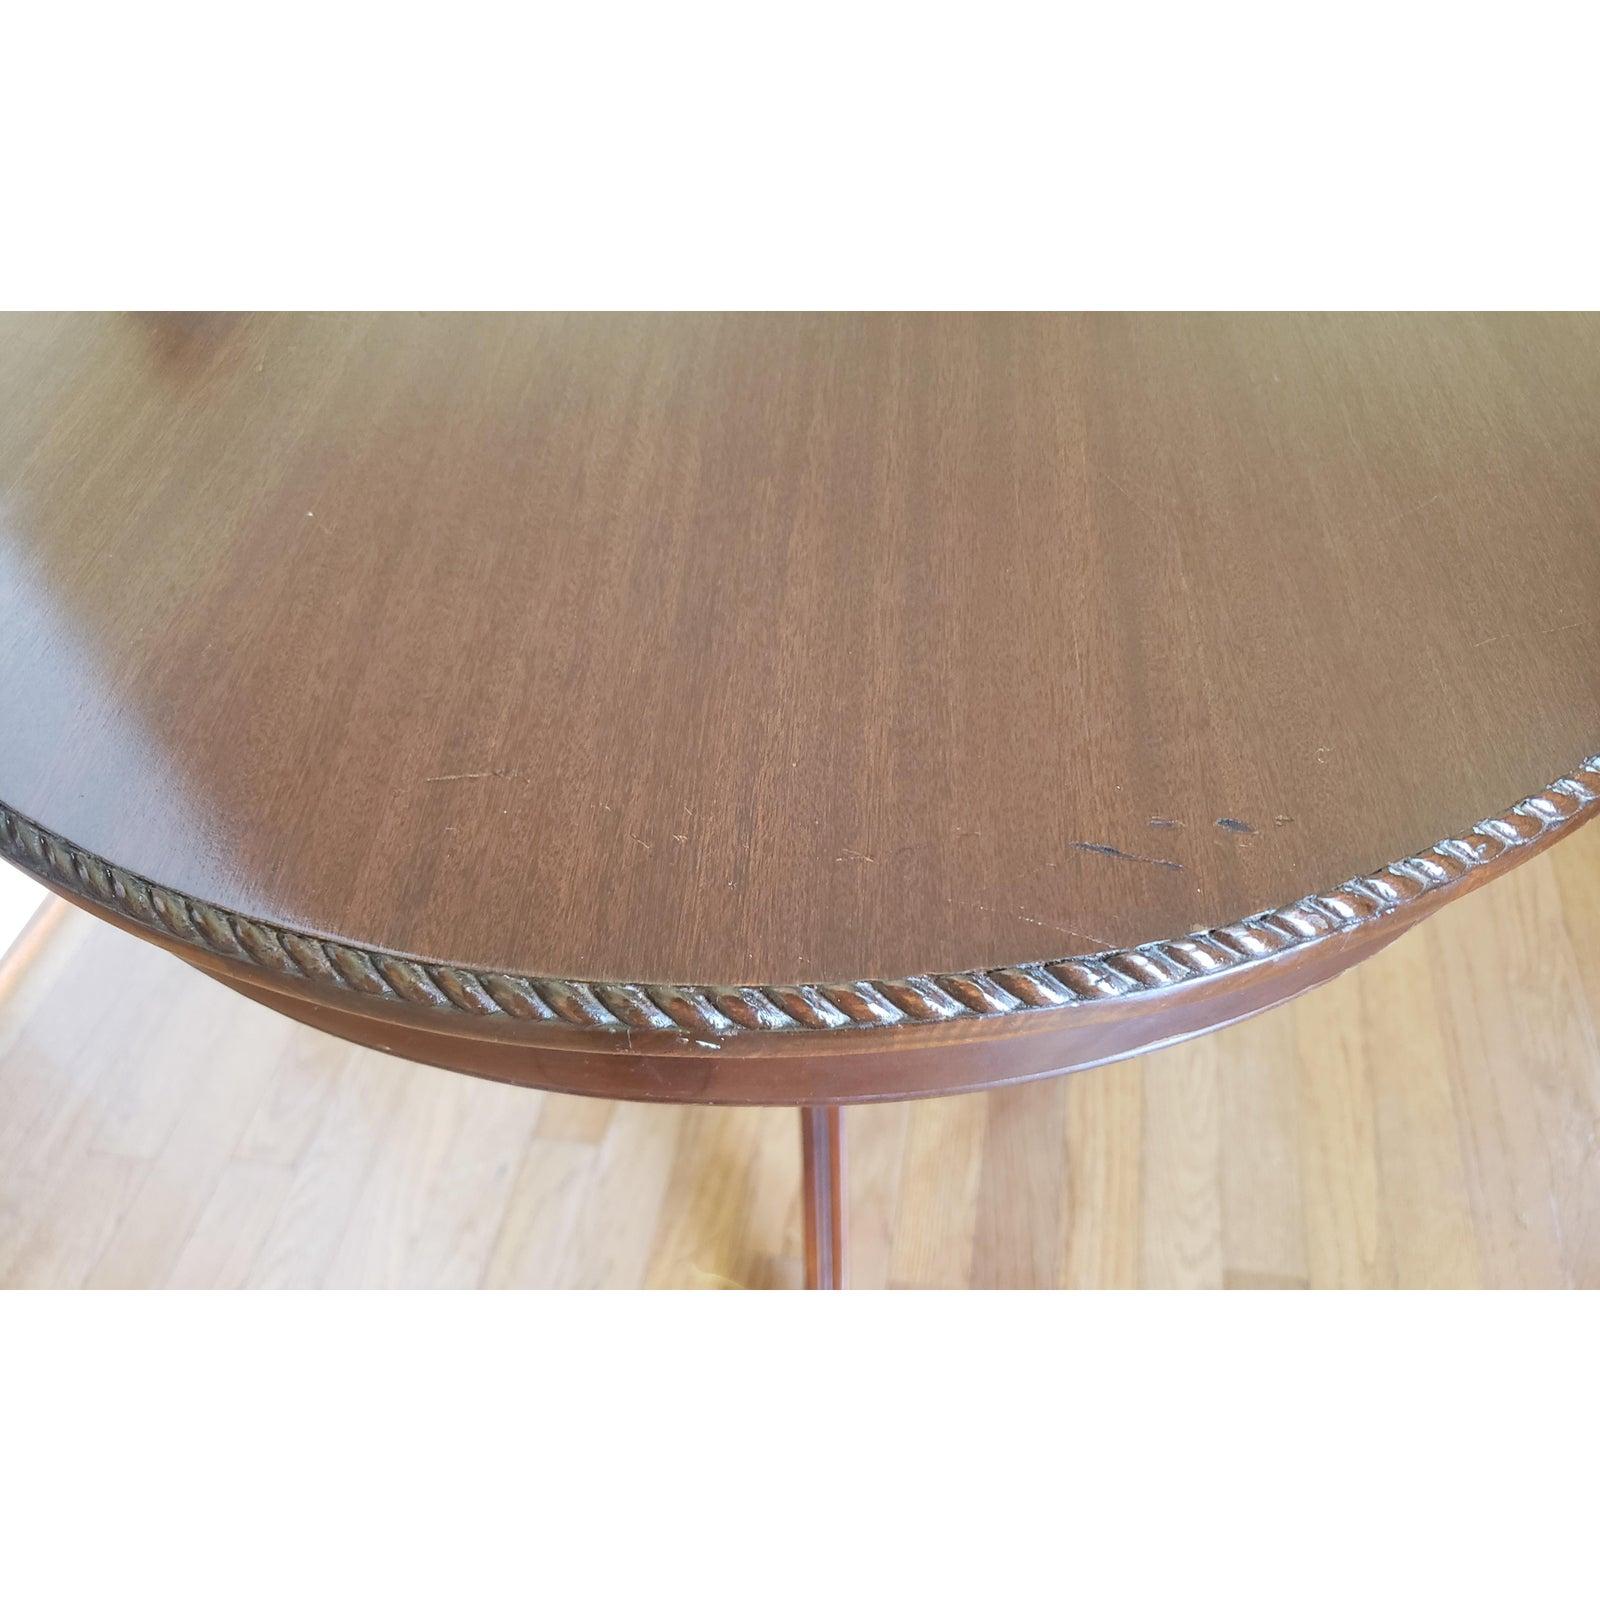 North American 1970s Mahogany Twisted Edge Occasional Center Table